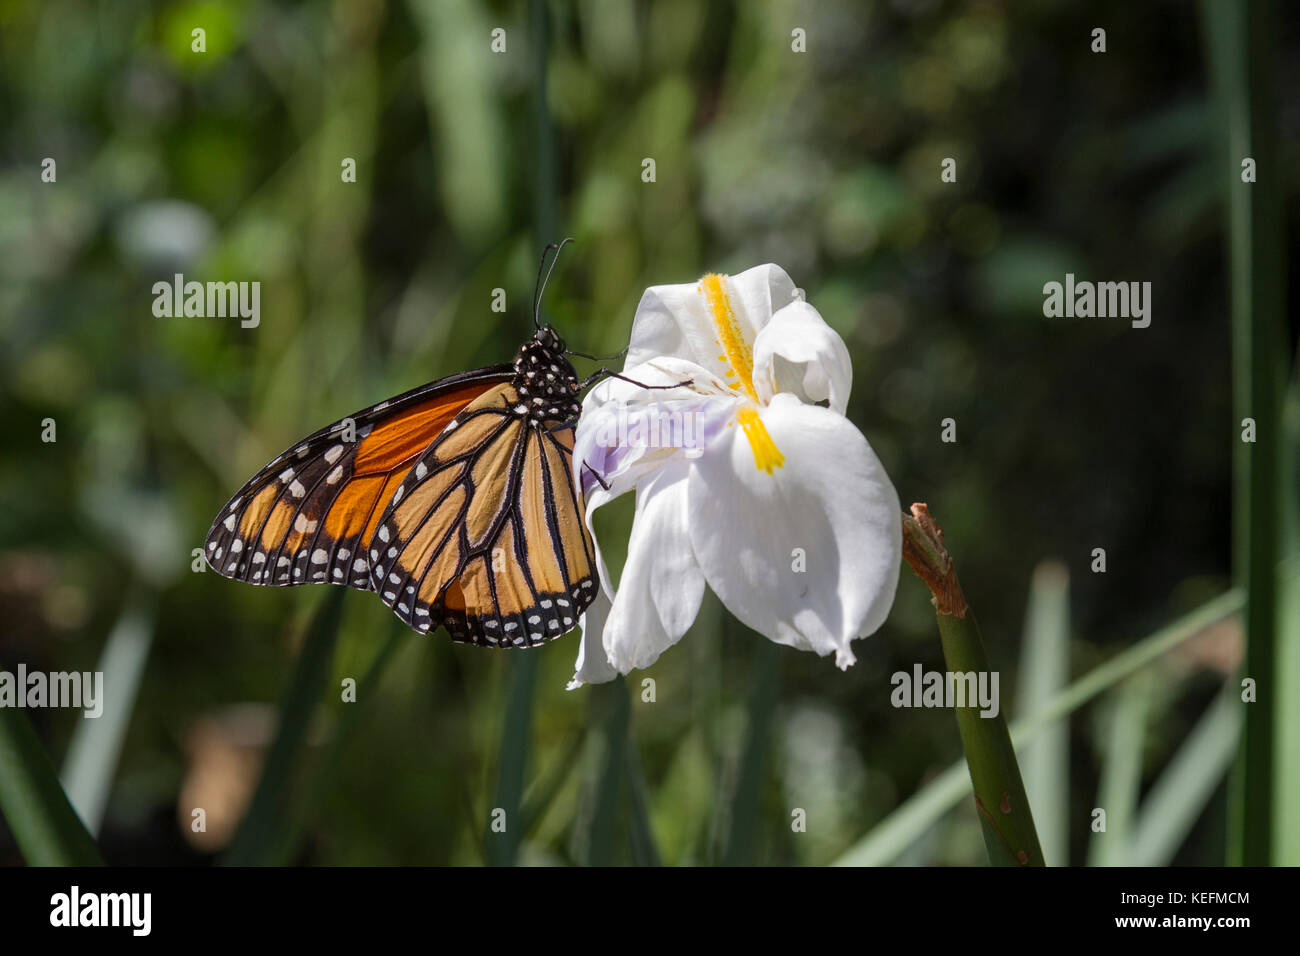 A monarch butterfly (Danaus plexippus) rests on a white wild iris on a sunny day in a California garden. Stock Photo